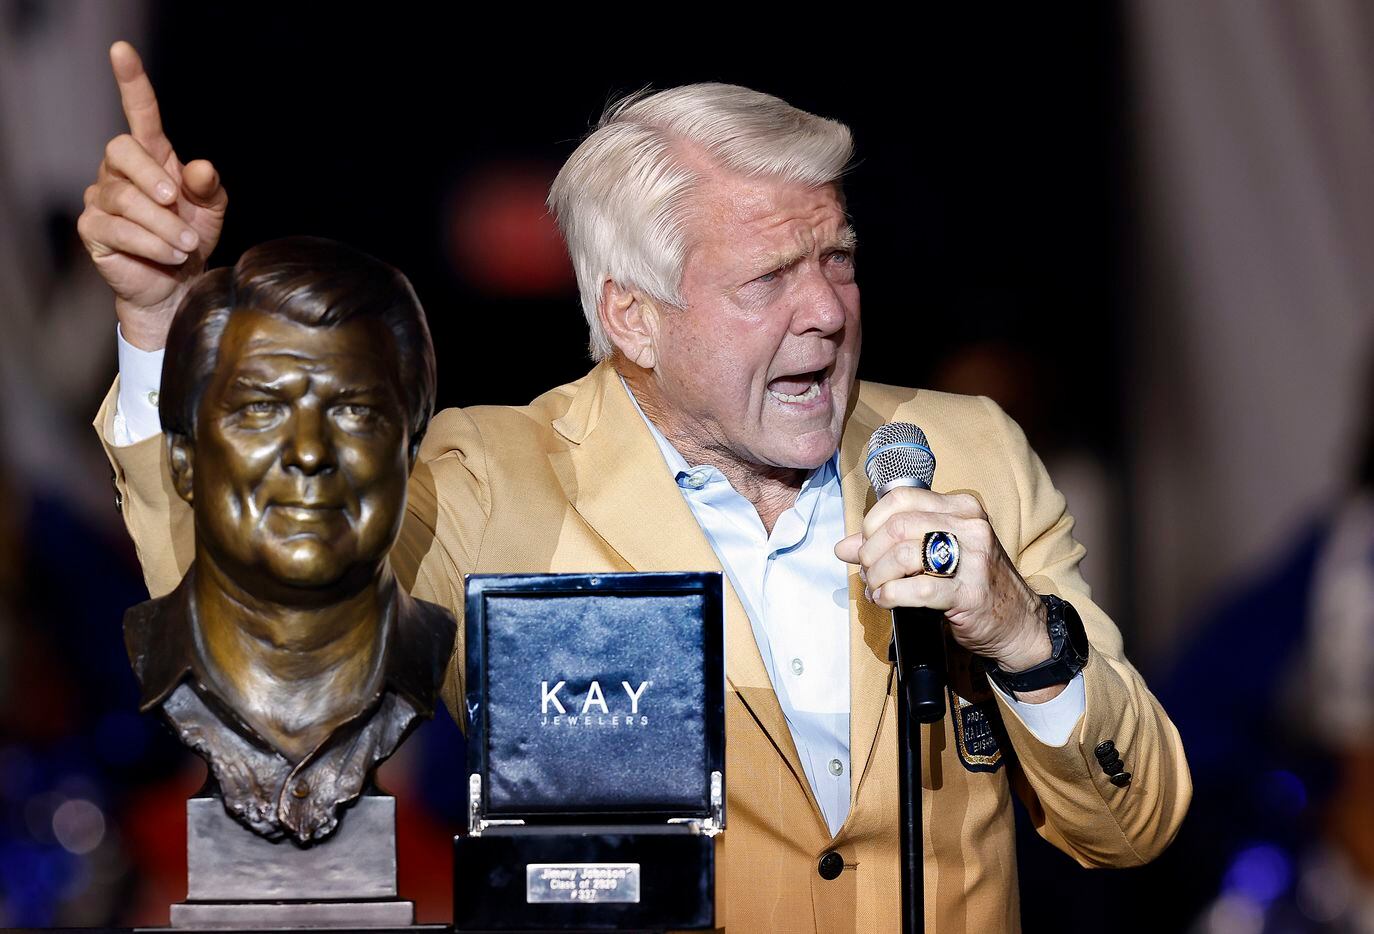 Former Dallas Cowboys head coach and Pro Football Hall of Famer Jimmy Johnson delivers his Hall ring ceremony speech during halftime of the Philadelphia Eagles game at AT&T Stadium in Arlington, Monday, September 27, 2021. (Tom Fox/The Dallas Morning News)